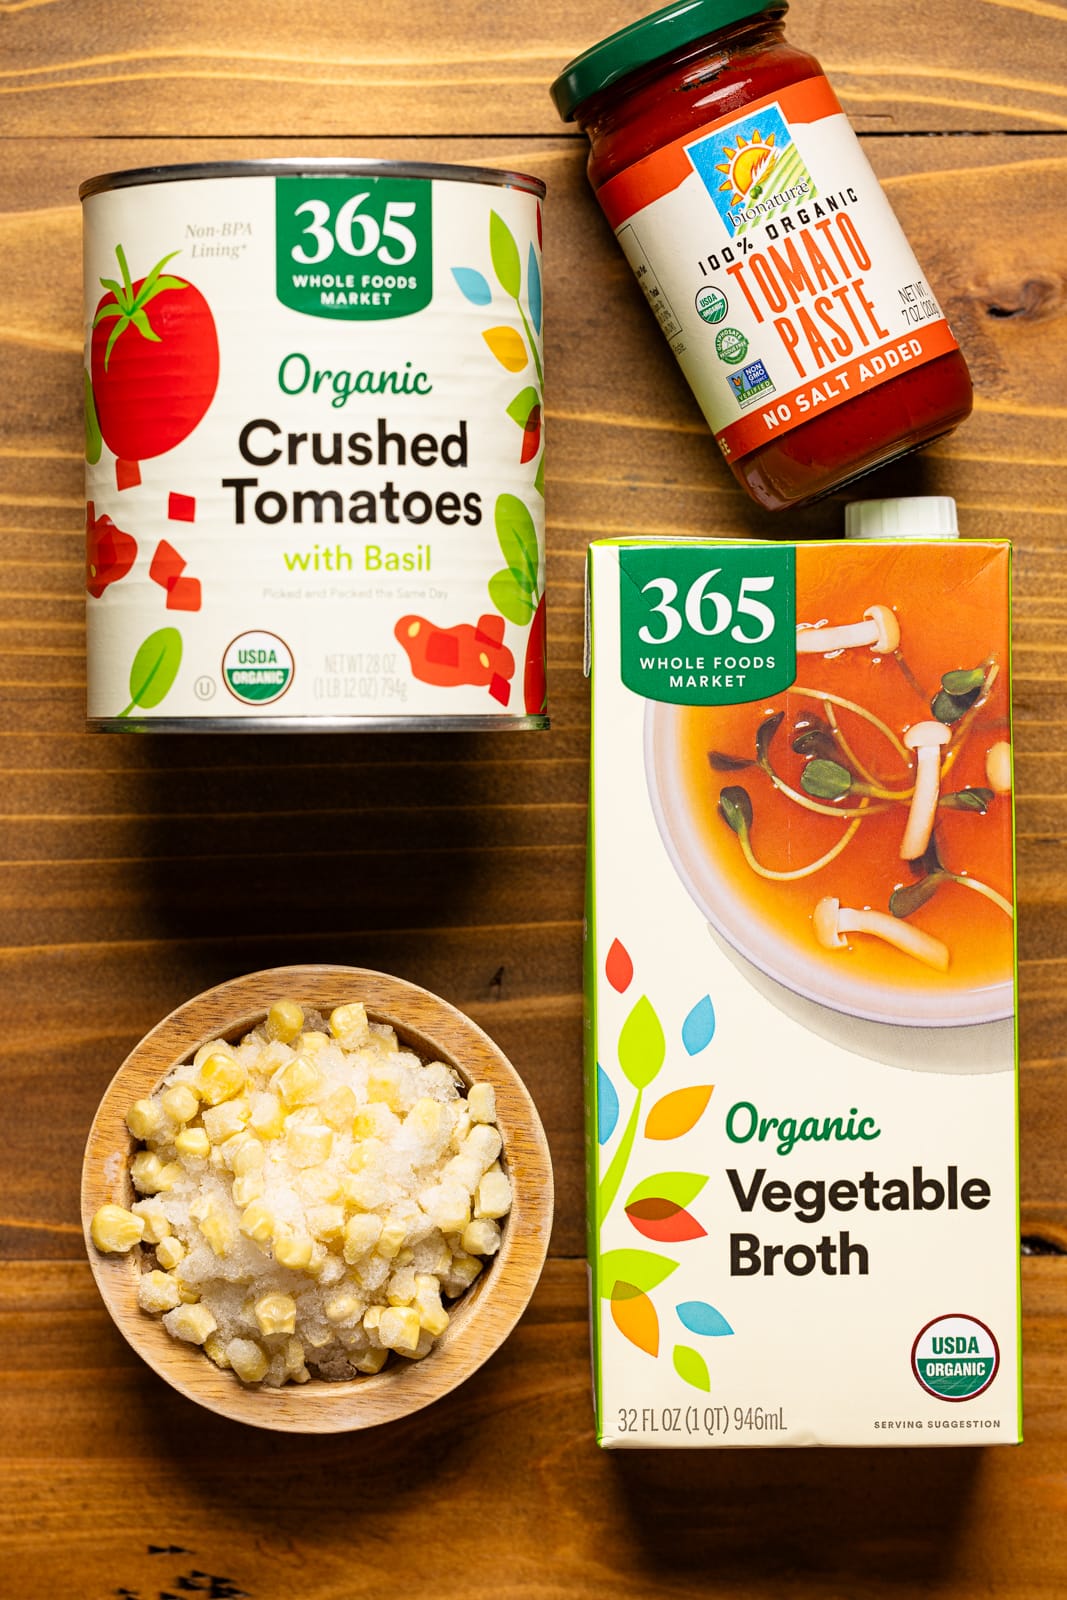  365 by Whole Foods Market, Organic Vegetable Broth, 32 Fl Oz